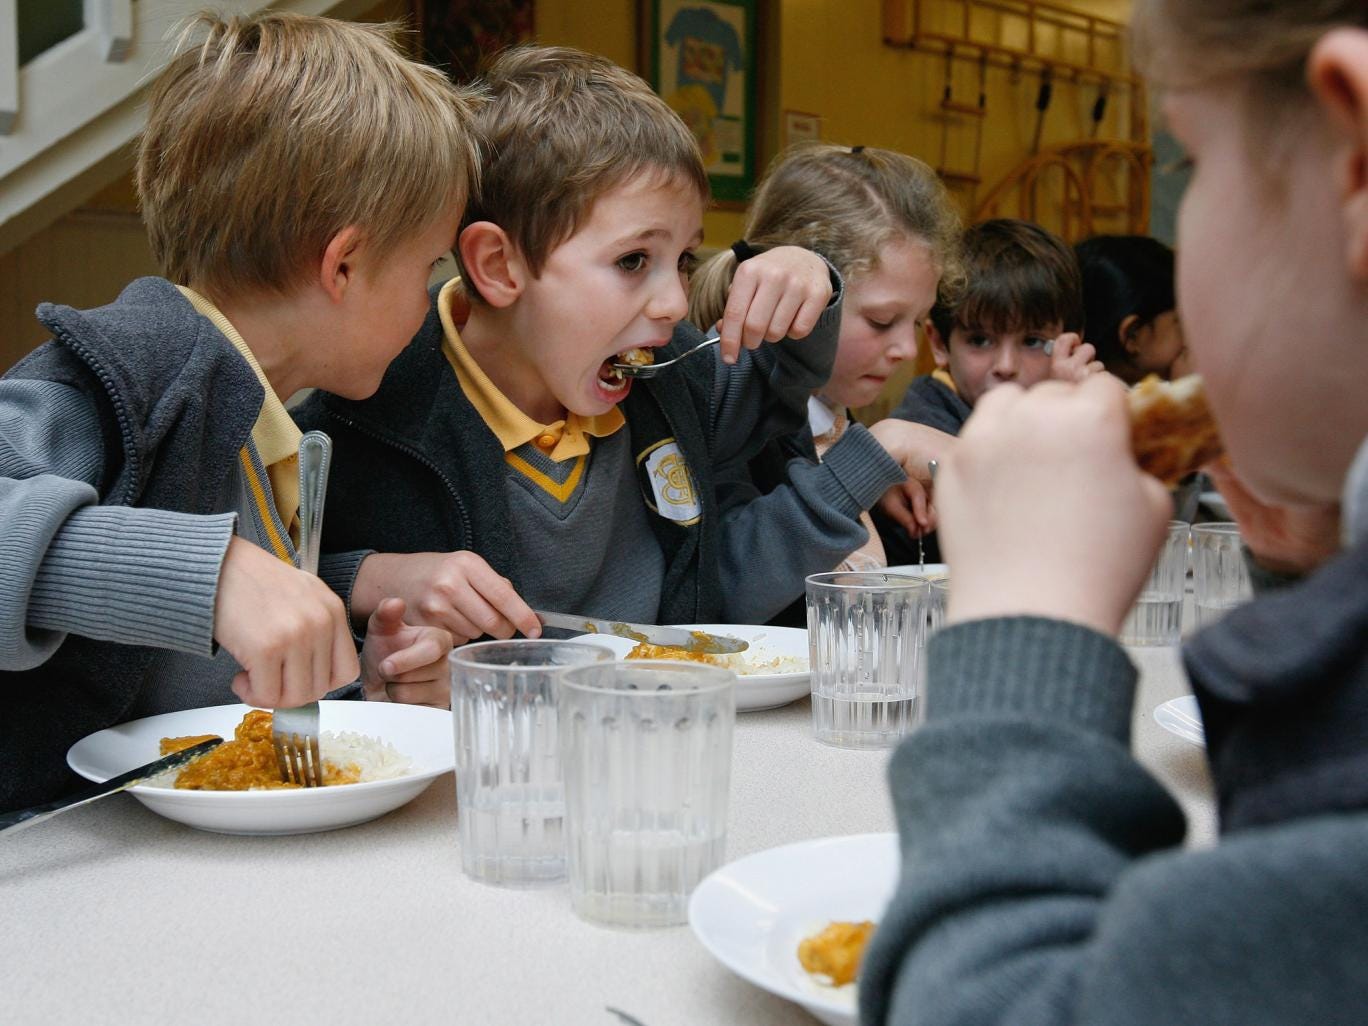 All primary school children will receive free school meals if the Liberal Democrats have a role in the next government